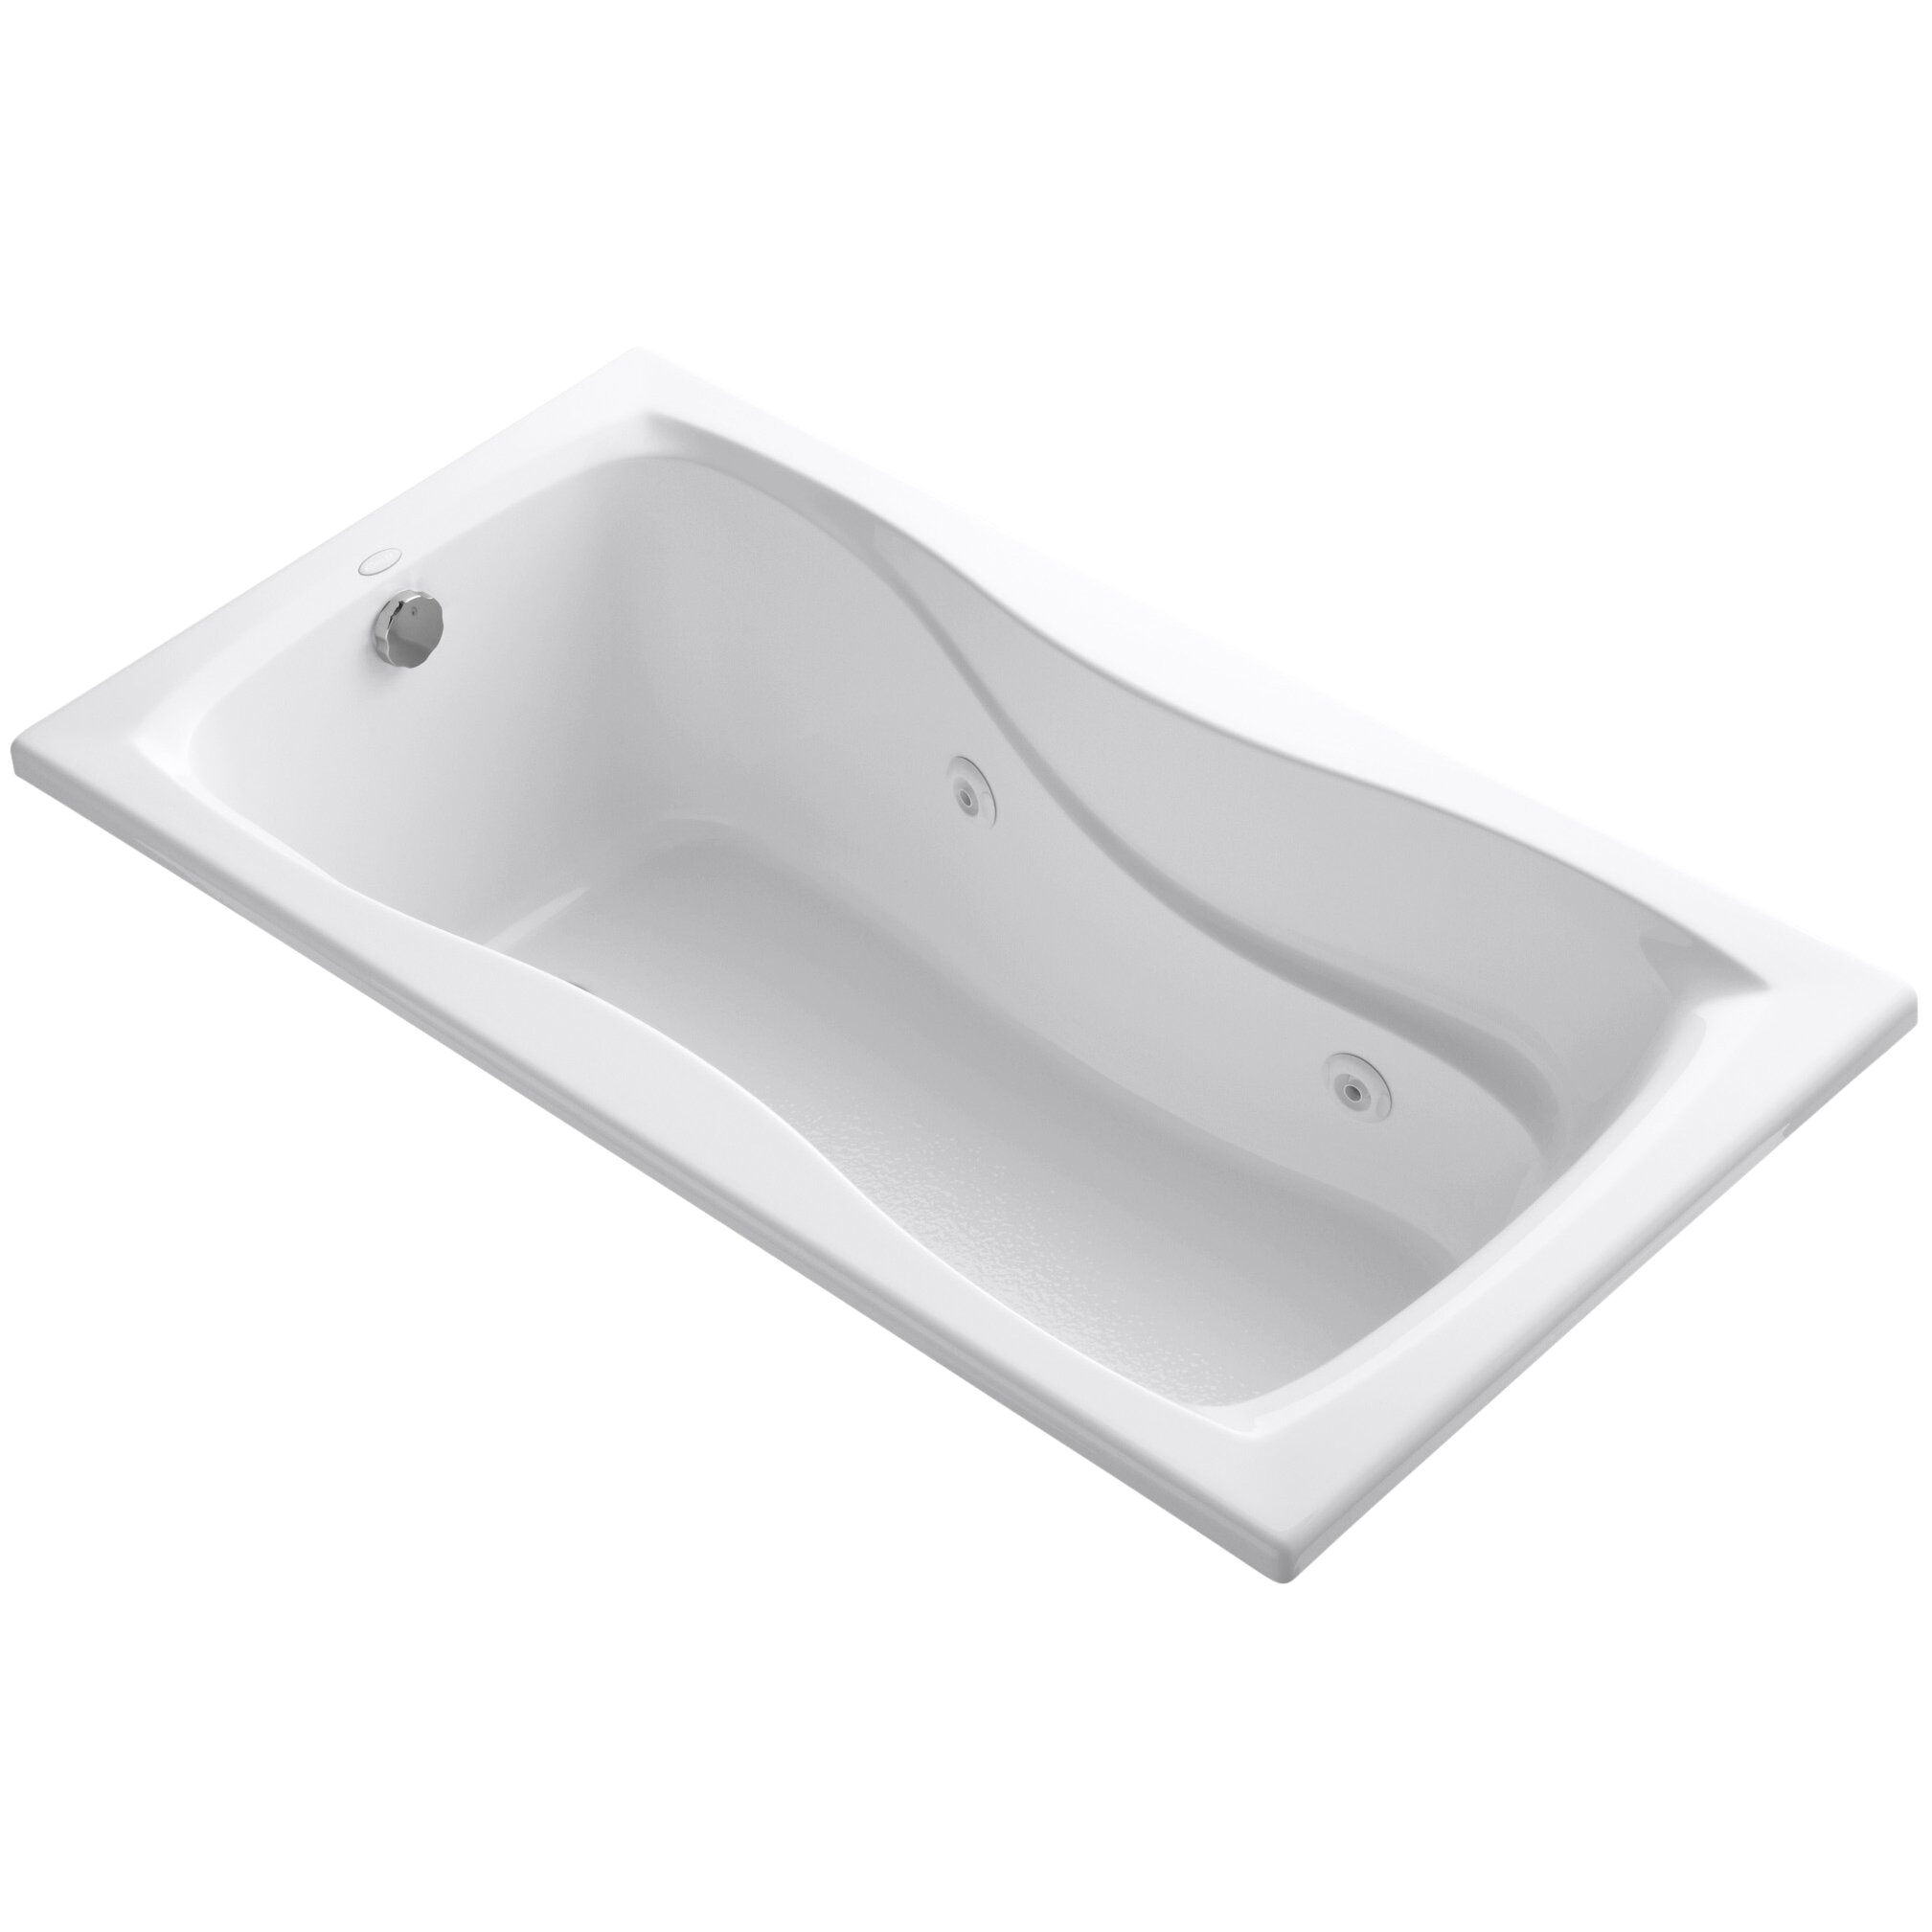 Kohler Hourglass 60 X 32 Drop In Whirlpool Bath with Custom Pump Location and Heater 1209 HB KOH